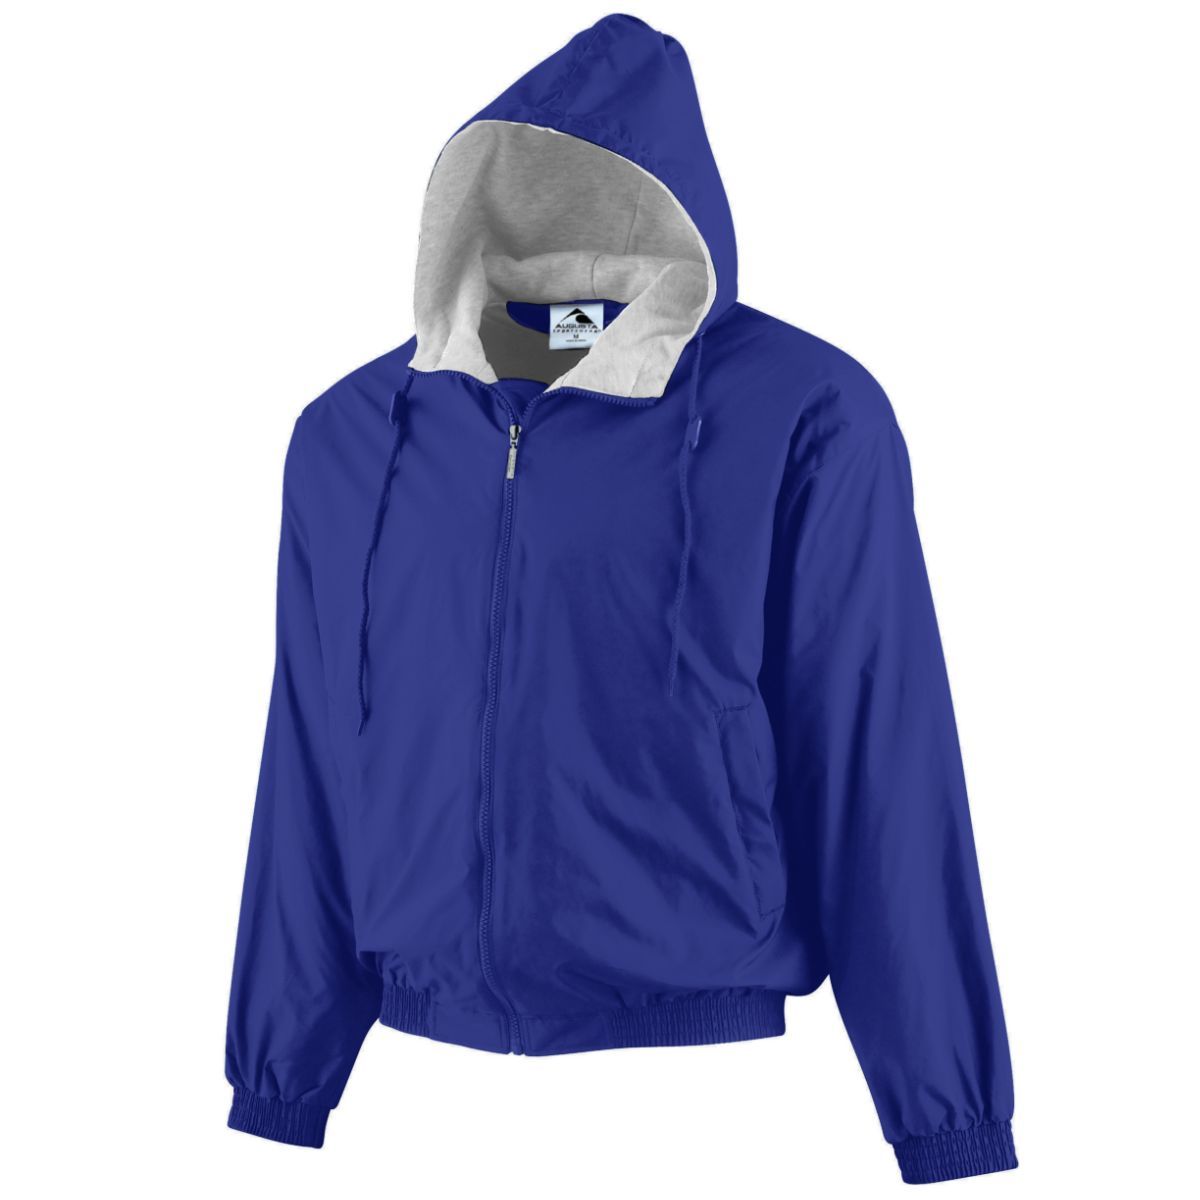 Augusta Sportswear Hooded Taffeta Jacket/Fleece Lined in Purple  -Part of the Adult, Adult-Jacket, Augusta-Products, Outerwear product lines at KanaleyCreations.com